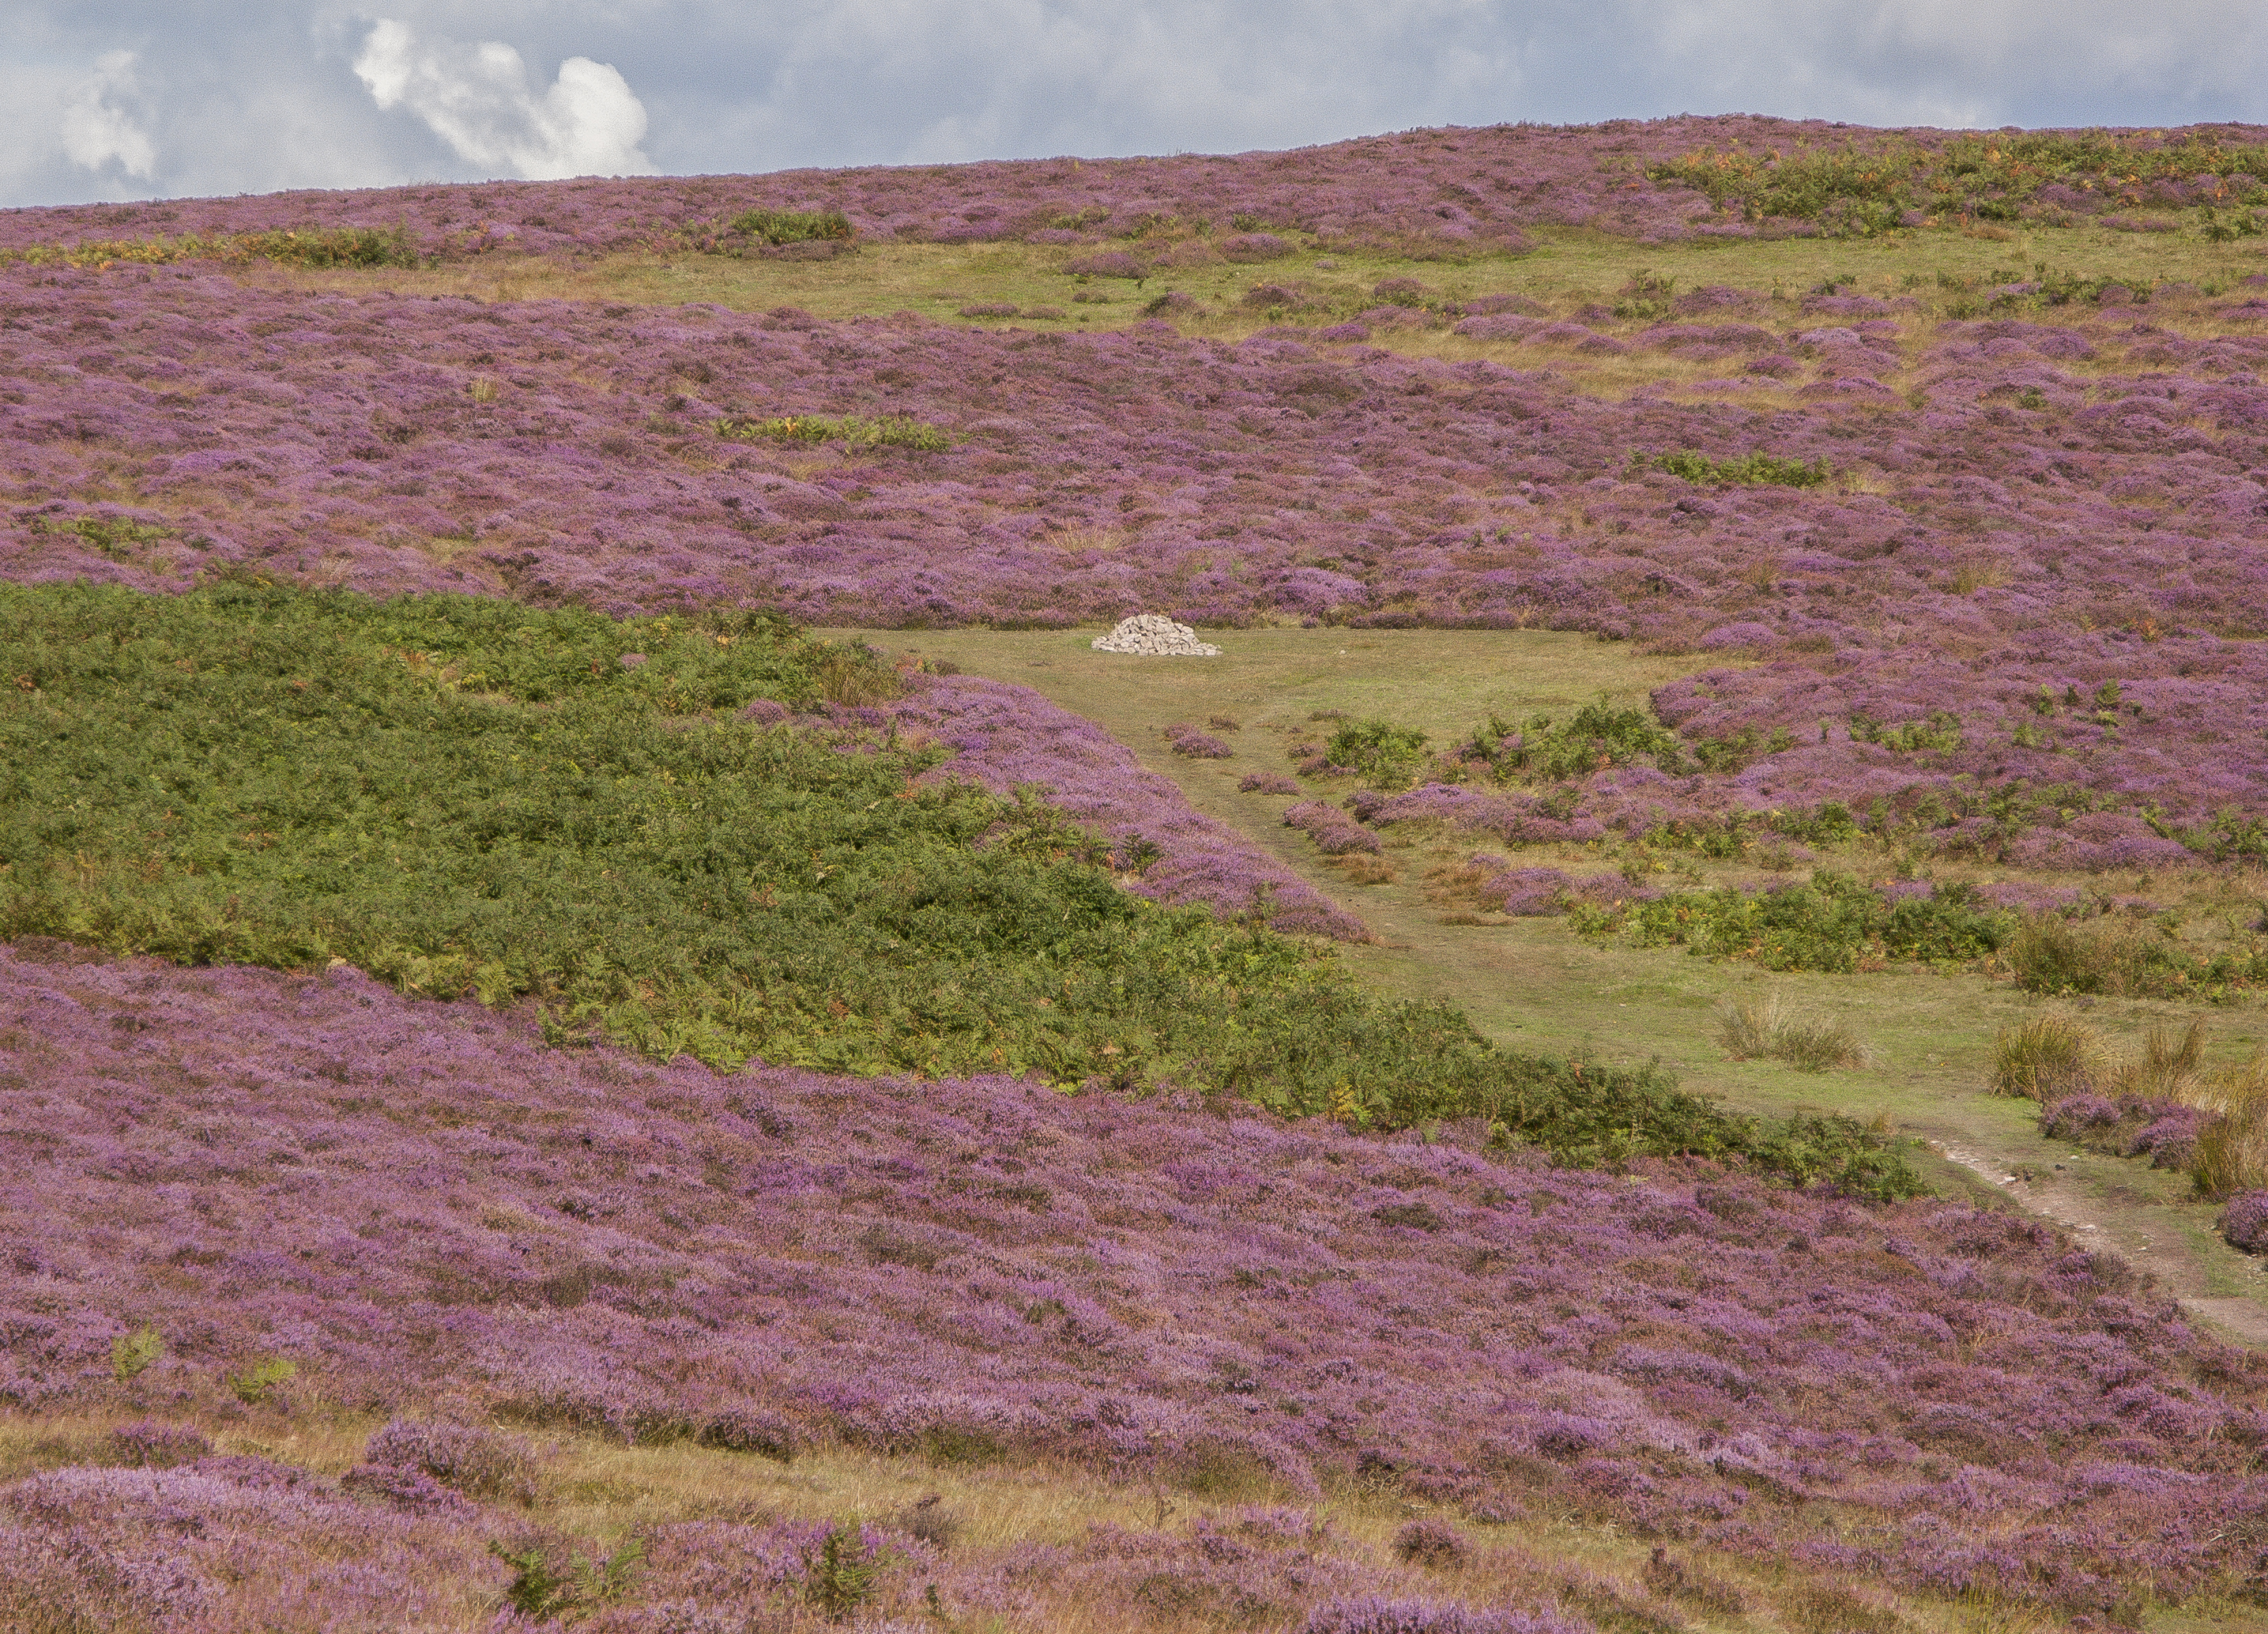 There will be no mass flowering of purple heather this year, the National Trust warns (PJ Howsam/National Trust/PA)